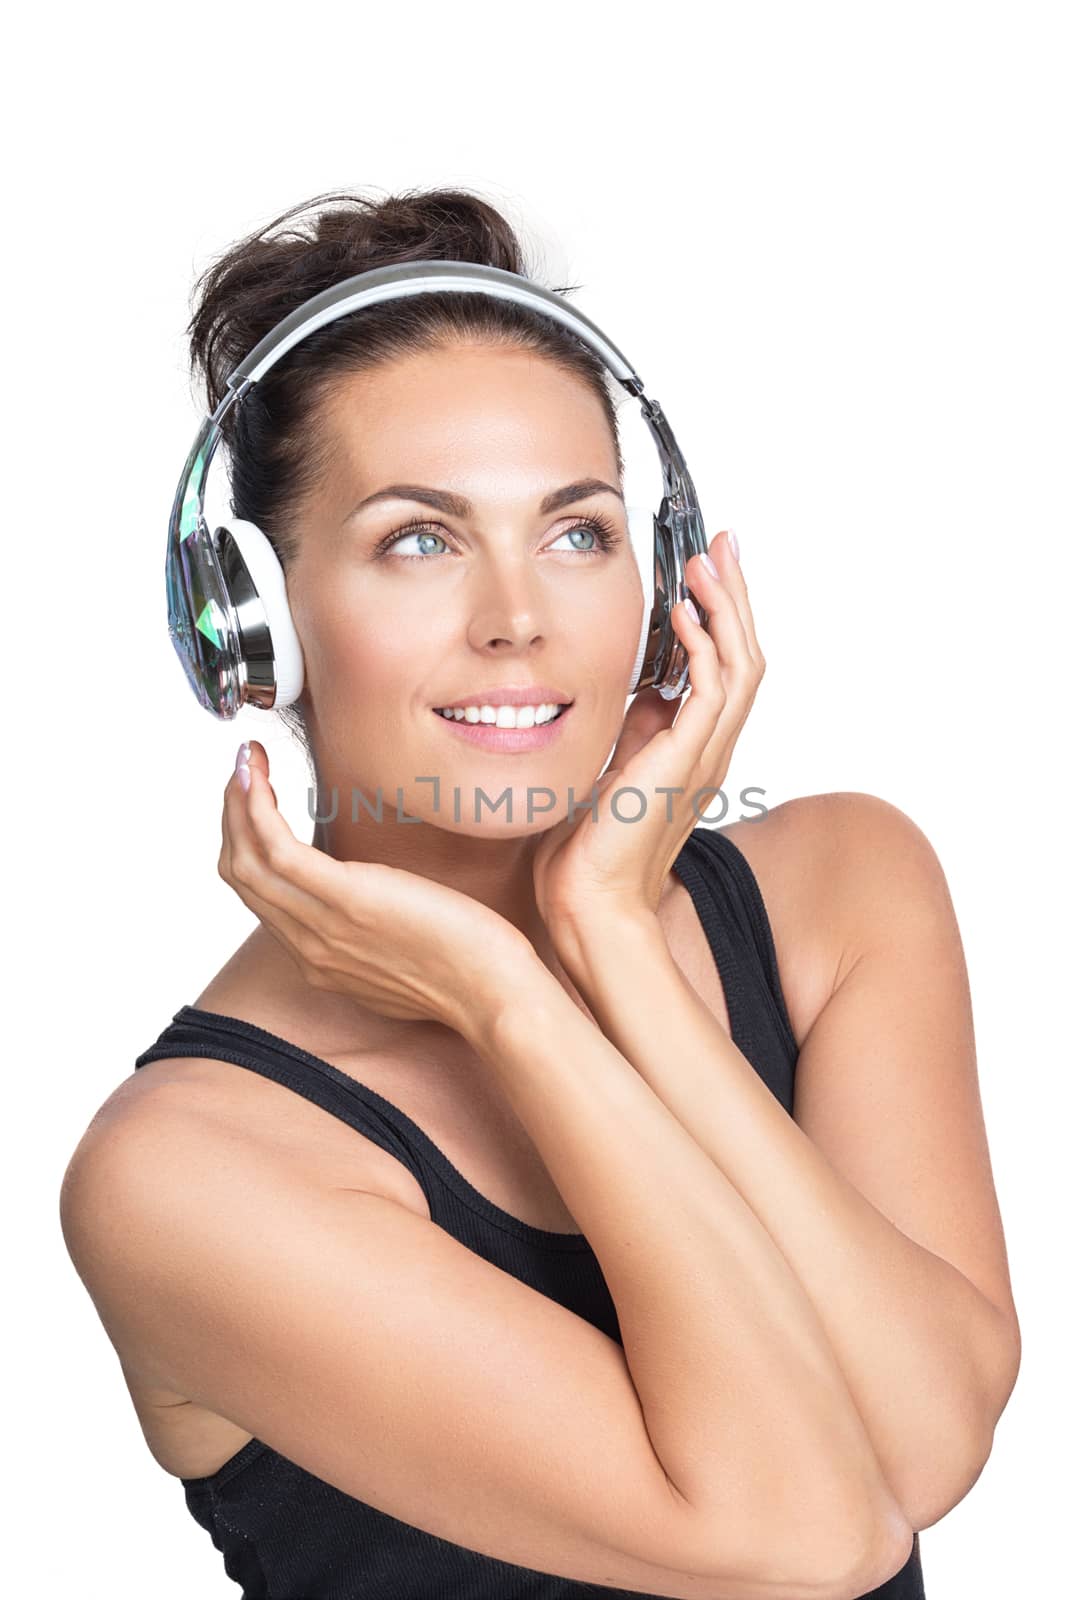 Young smiling woman listening to music with headphones, isolated on white background